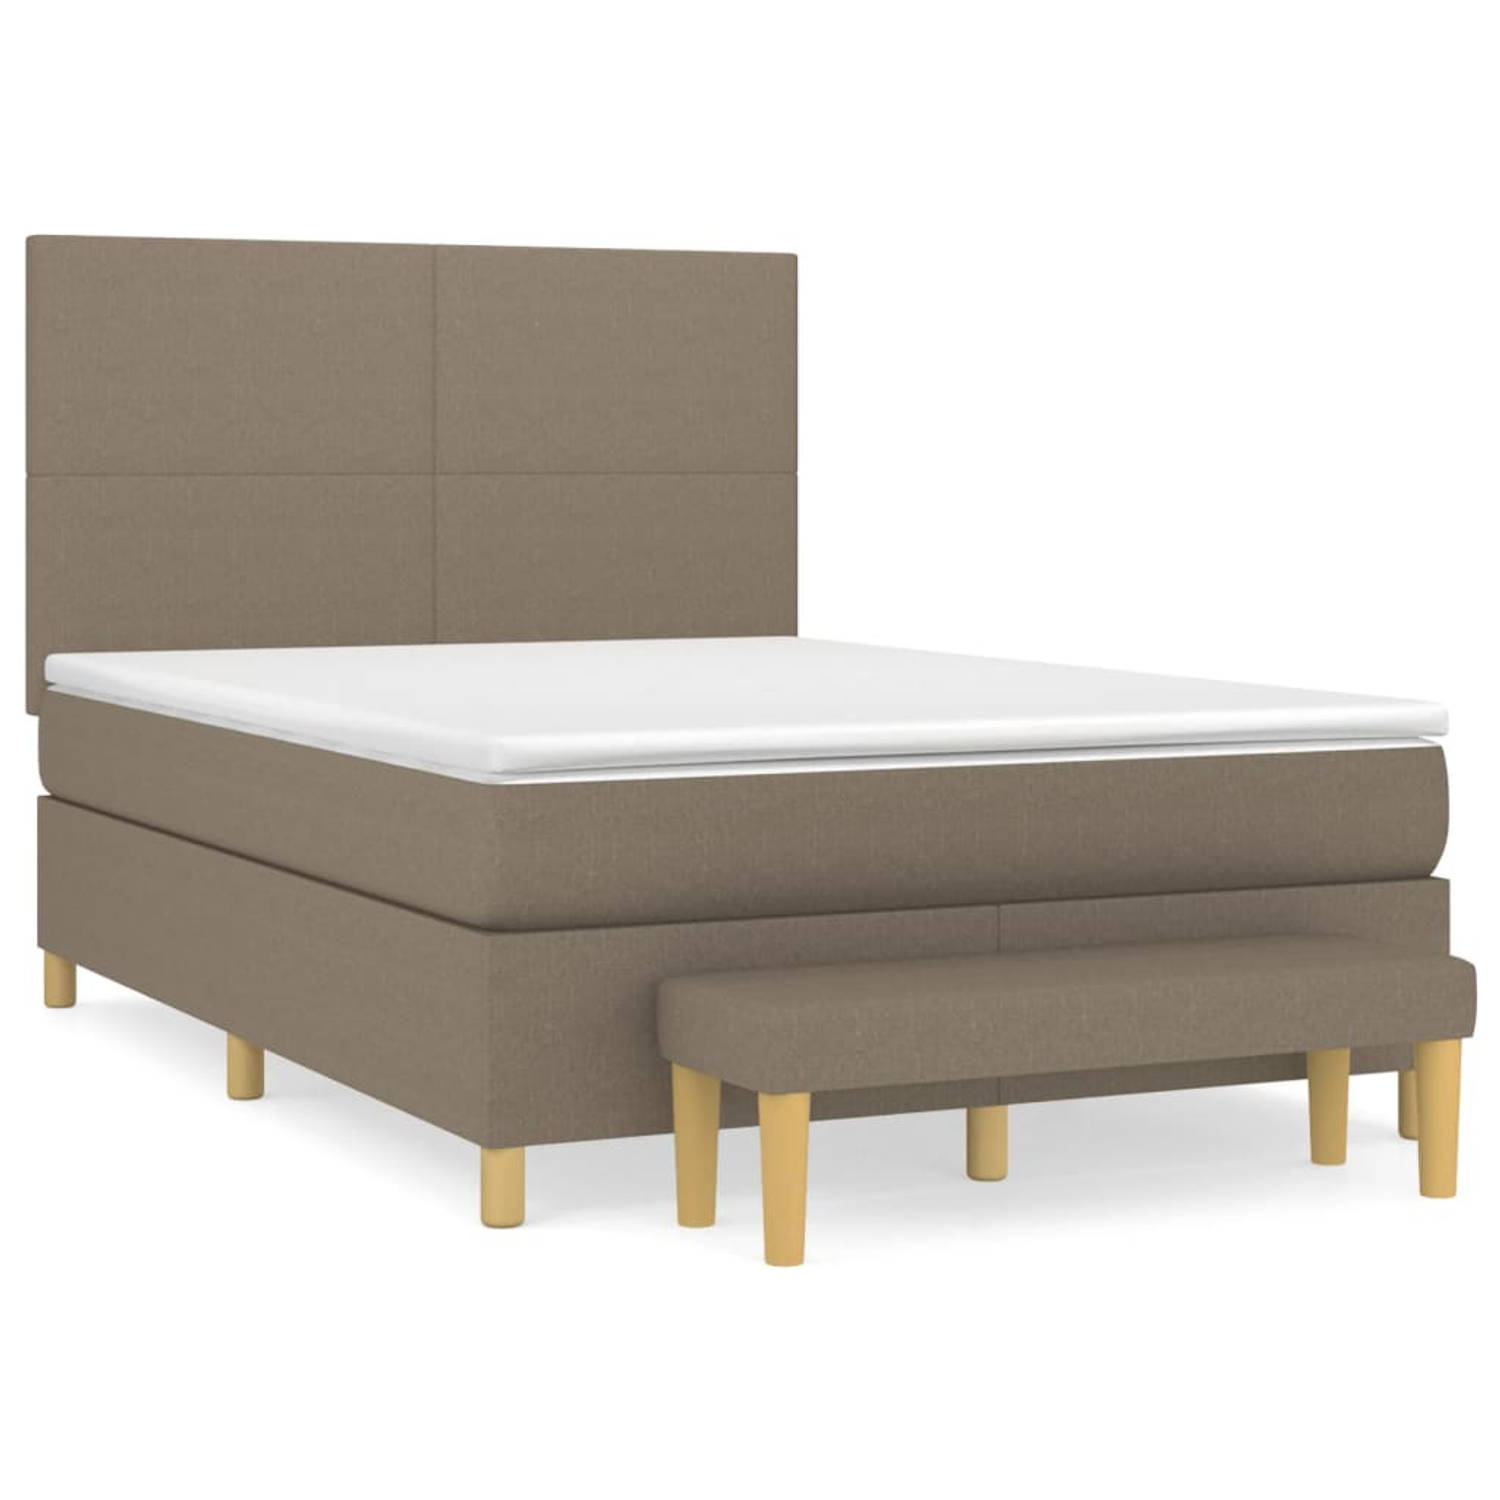 The Living Store Boxspringbed - Bed - 203 x 144 x 118/128 cm - Taupe - Stof - Multiplex - Bewerkt hout